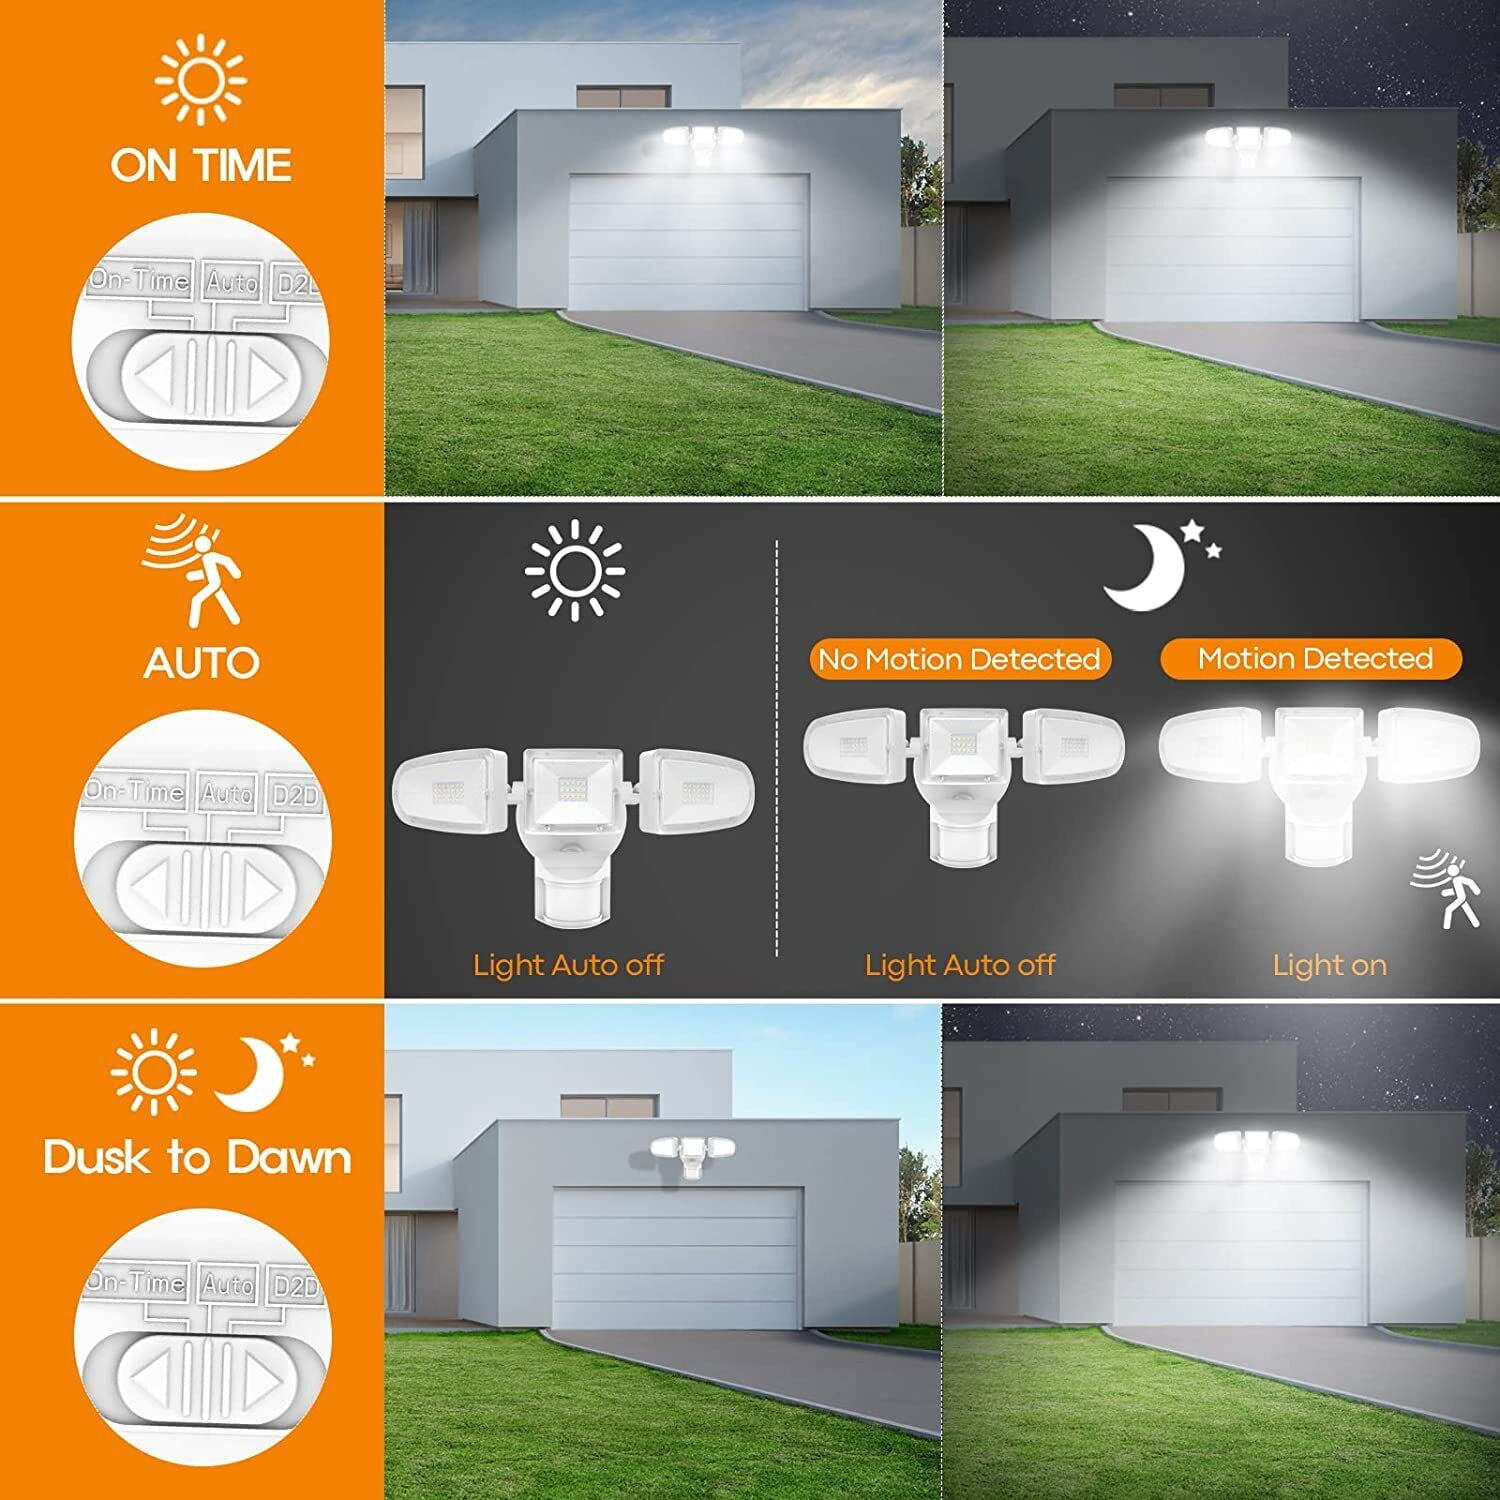 K KASONIC Solar Flood Lights, 2500LM Super Bright Motion Sensor with  Remote, IP65 Waterproof Solar Security Spot Lights with 15Ft Cable for  Patio, Garage, Porch, Yard, 2 Pack 